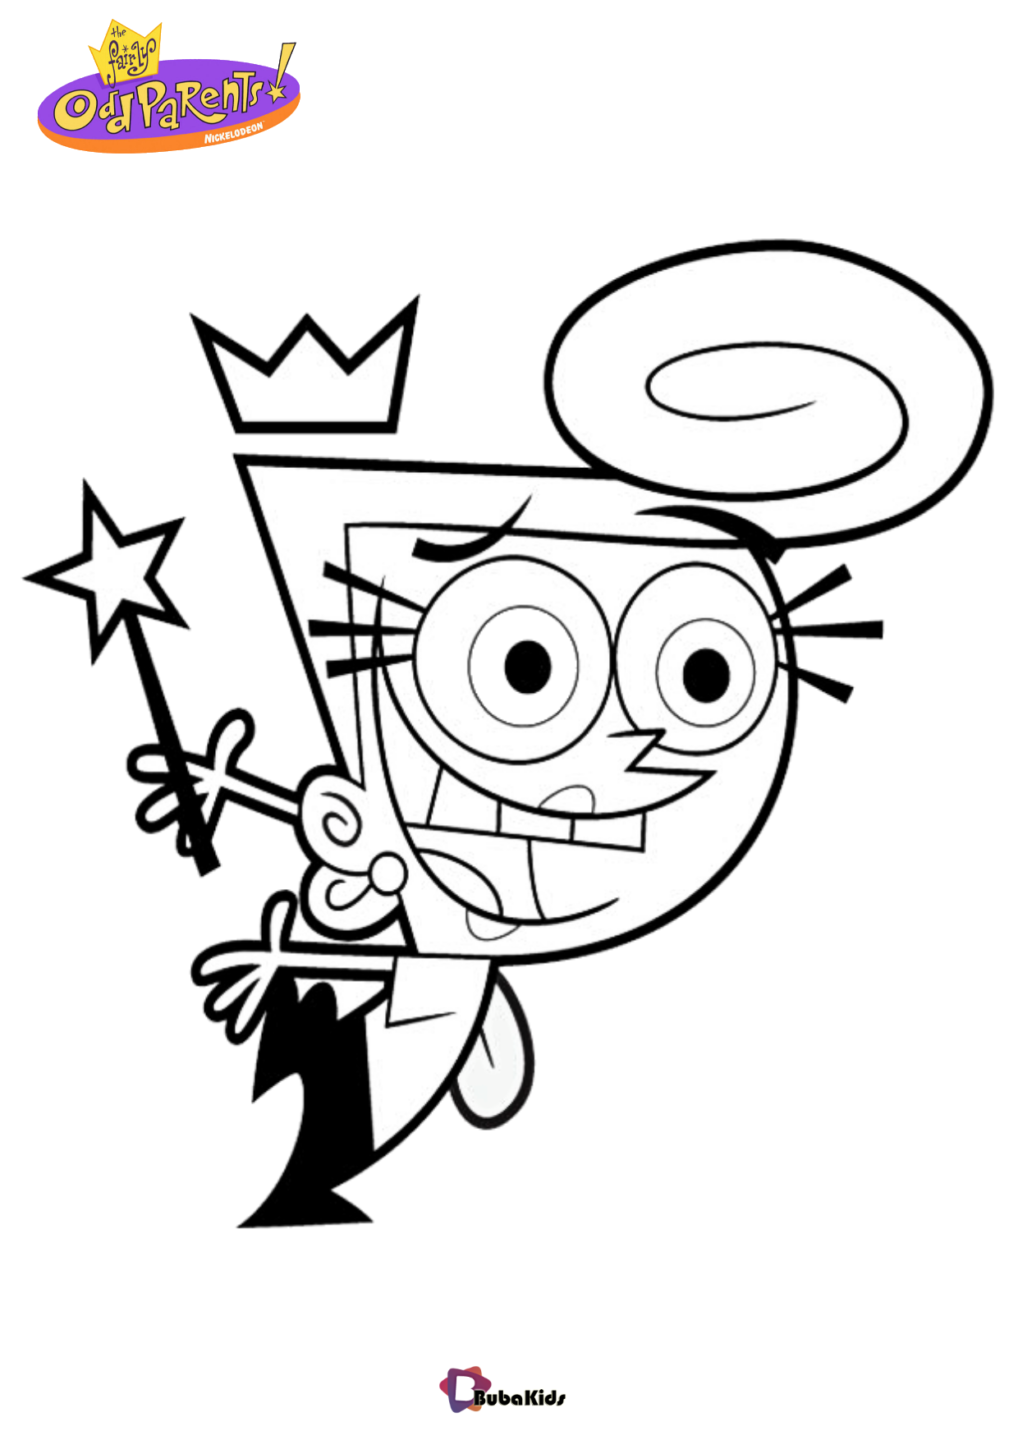 Fairly Oddparents Nickelodeon tv series coloring page